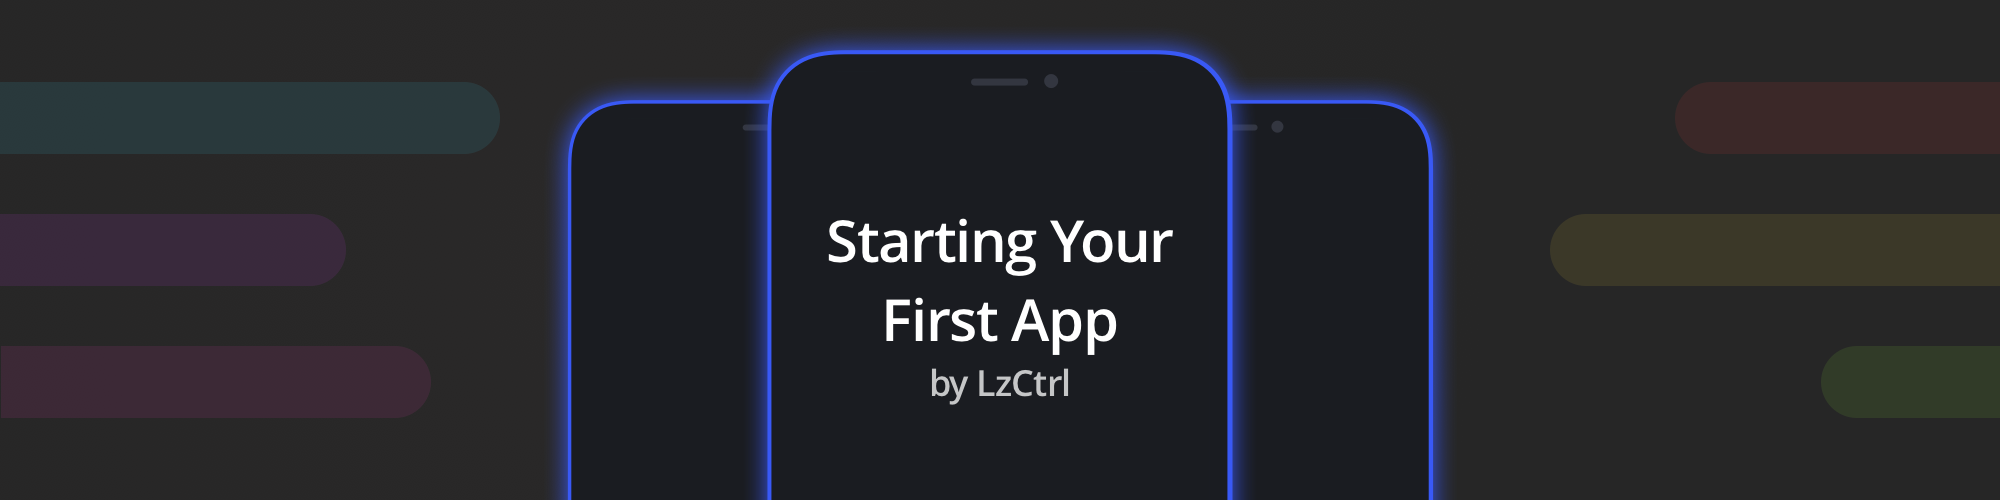 Starting Your First App